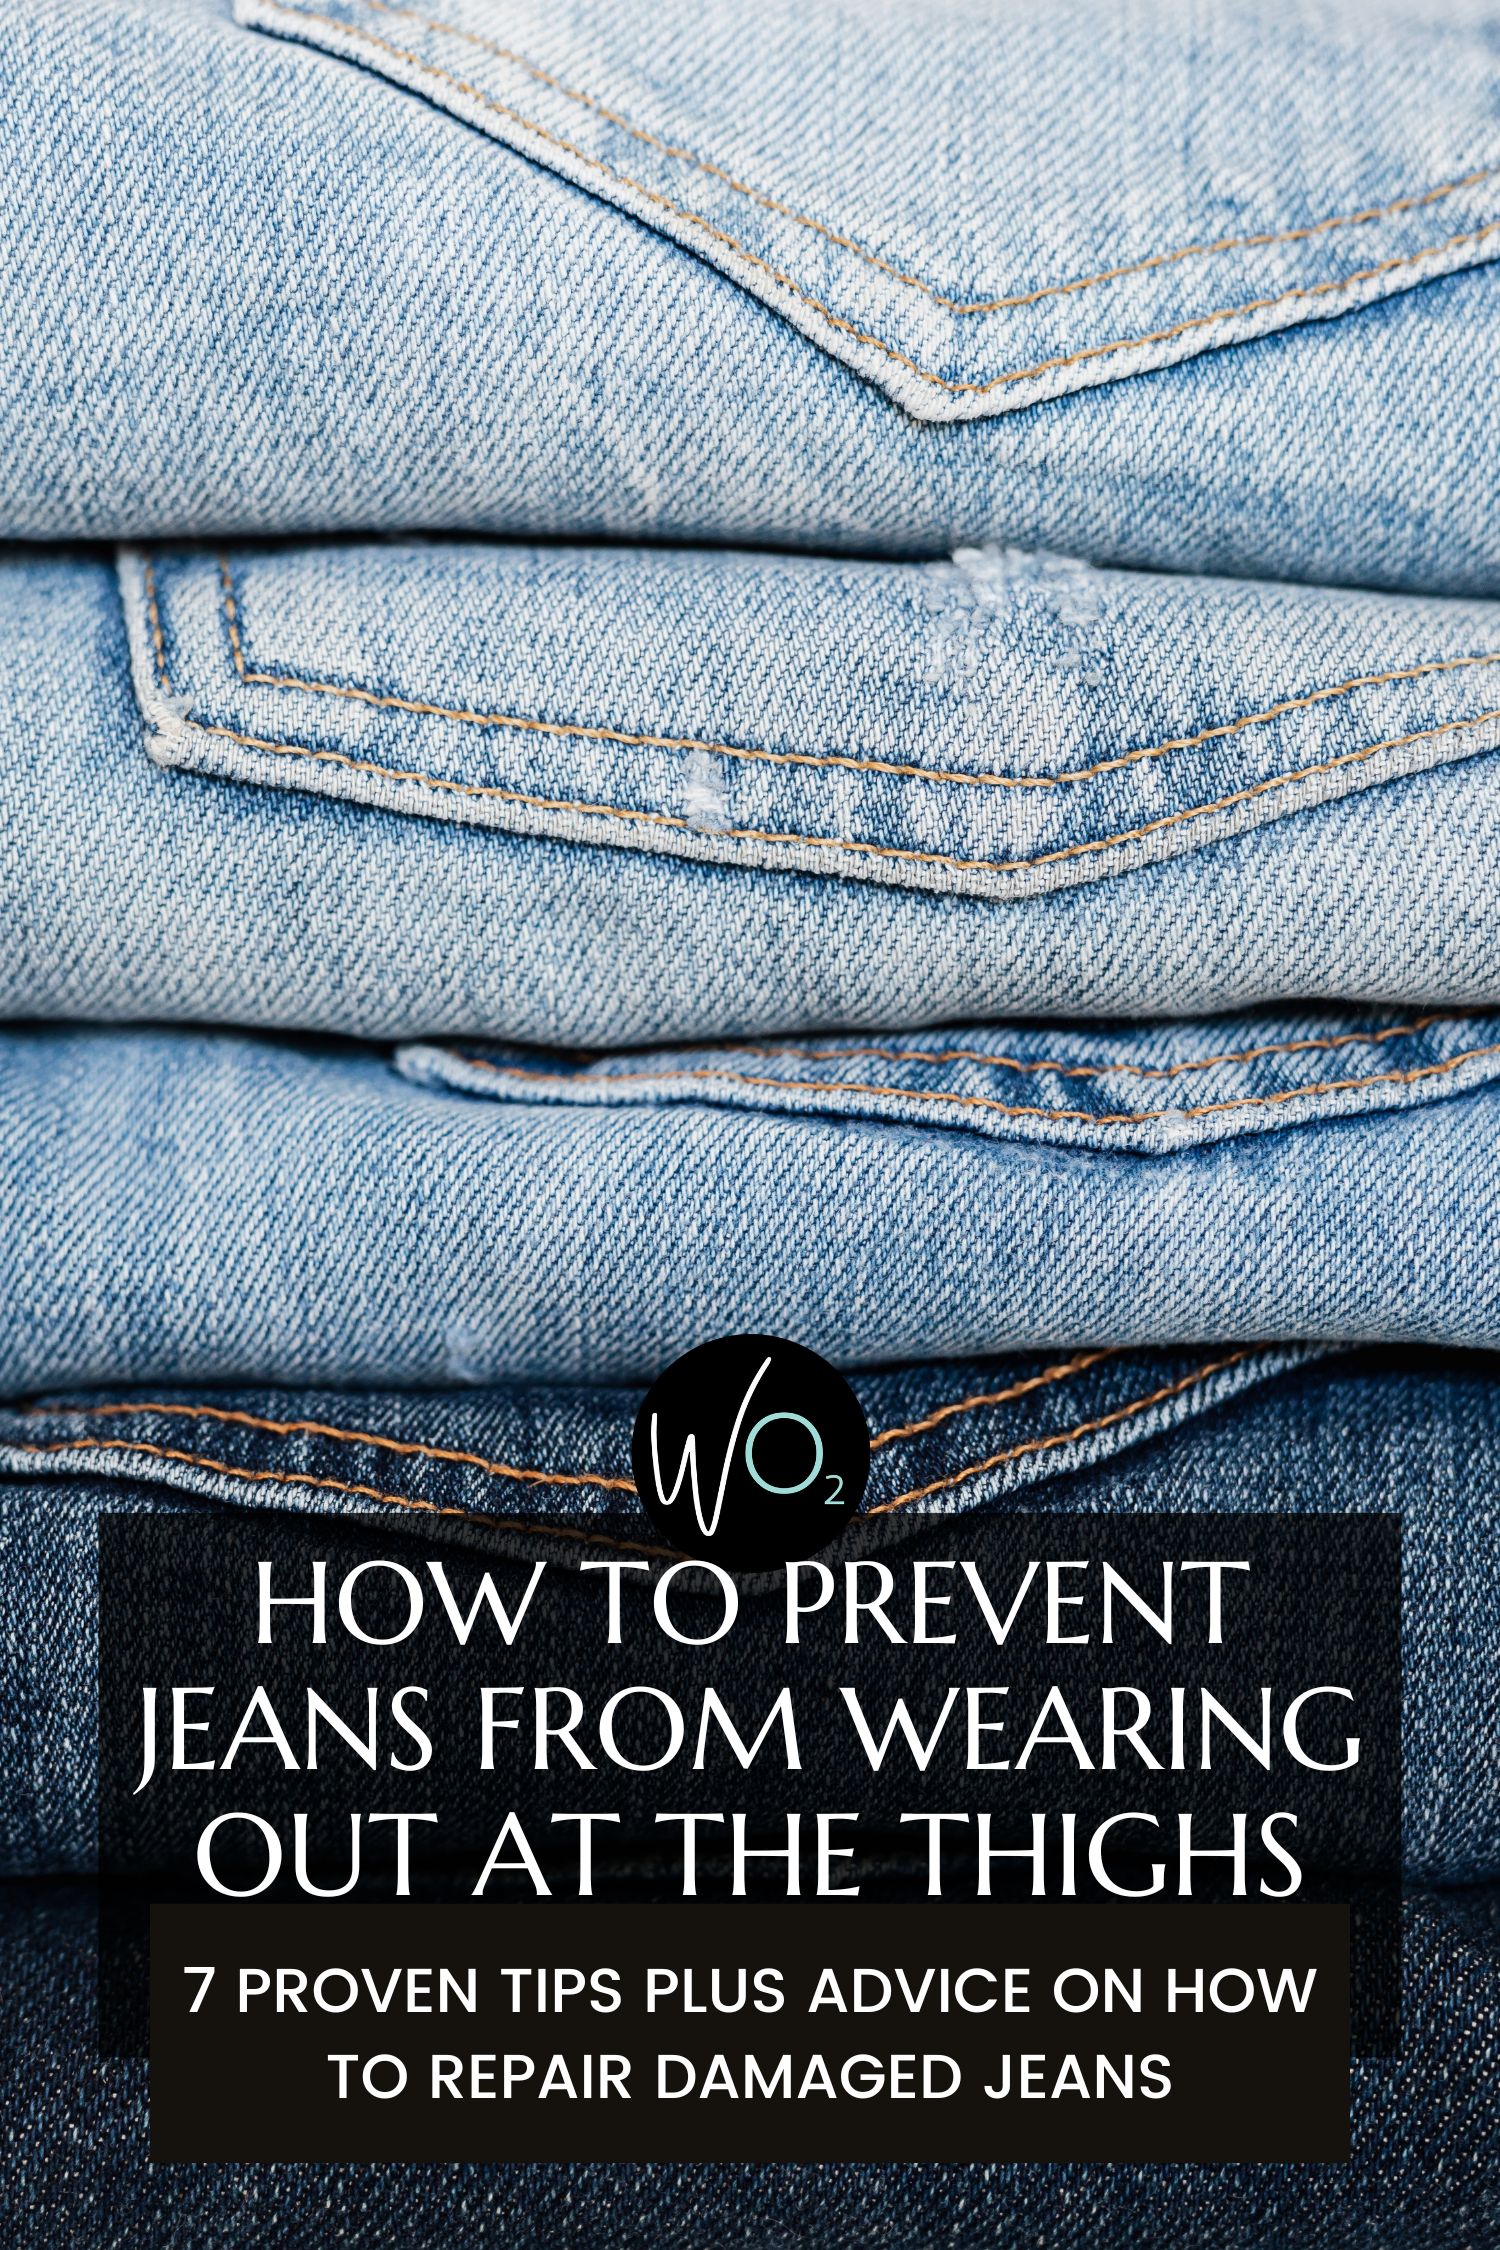 How to Prevent Jeans from Wearing Out in the Inner Thighs: 10 Tips